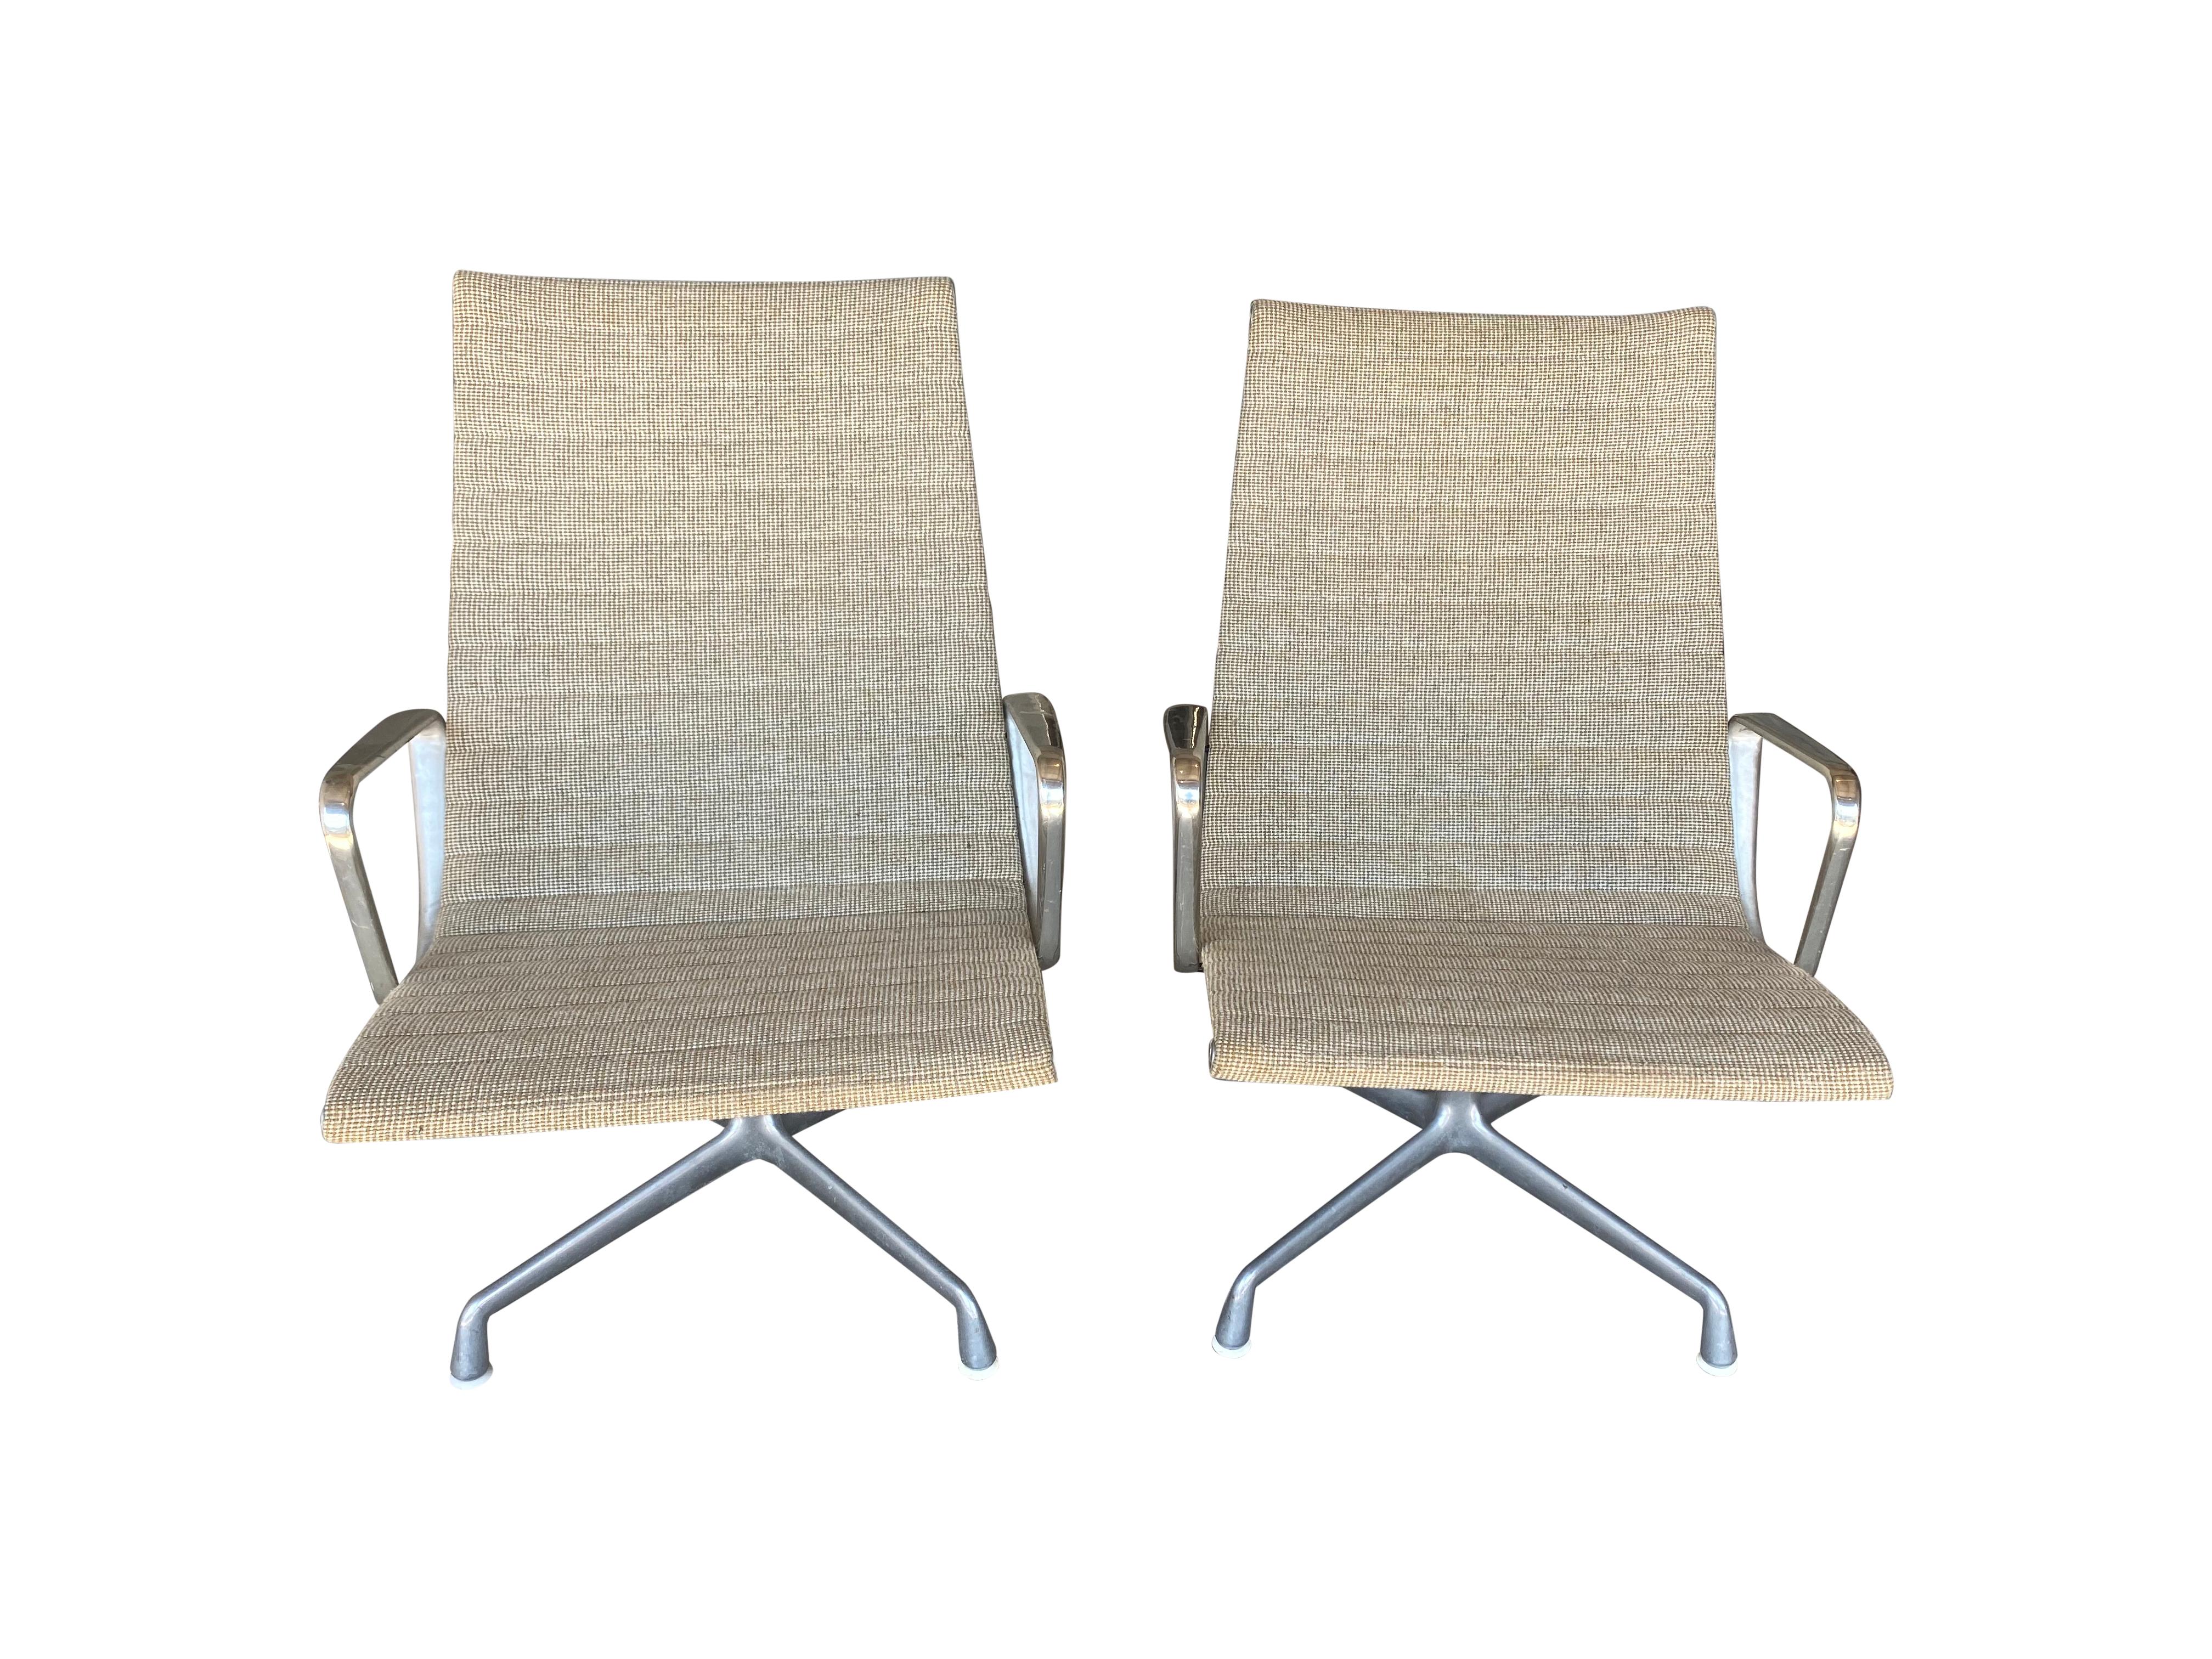 Mid-Century Modern Pair or Eames Aluminum Group Lounge Chairs with Alexander Girard Textile